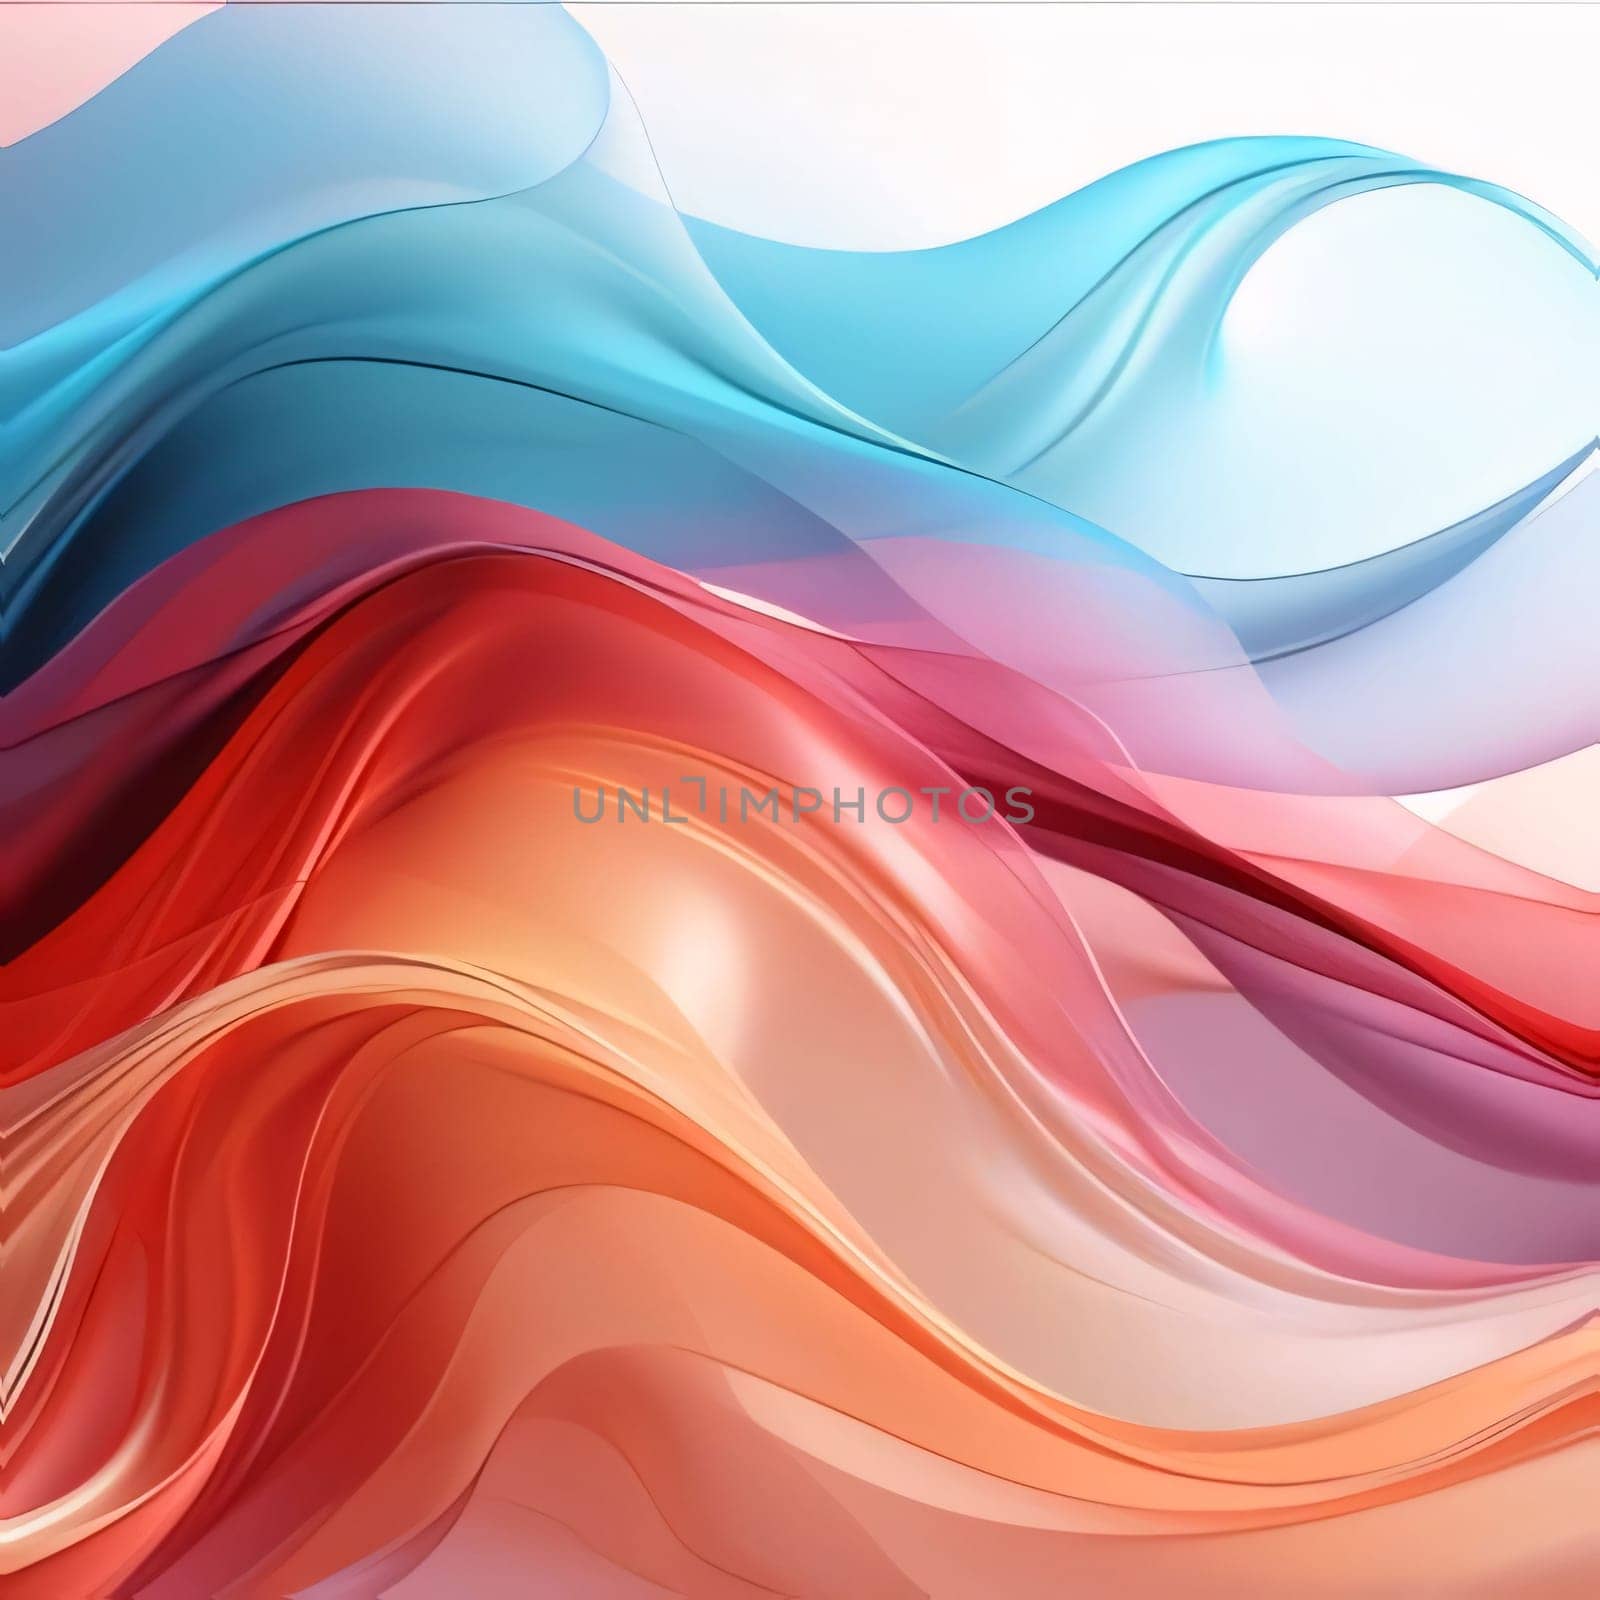 Abstract background design: abstract background with smooth lines in red, orange and blue colors